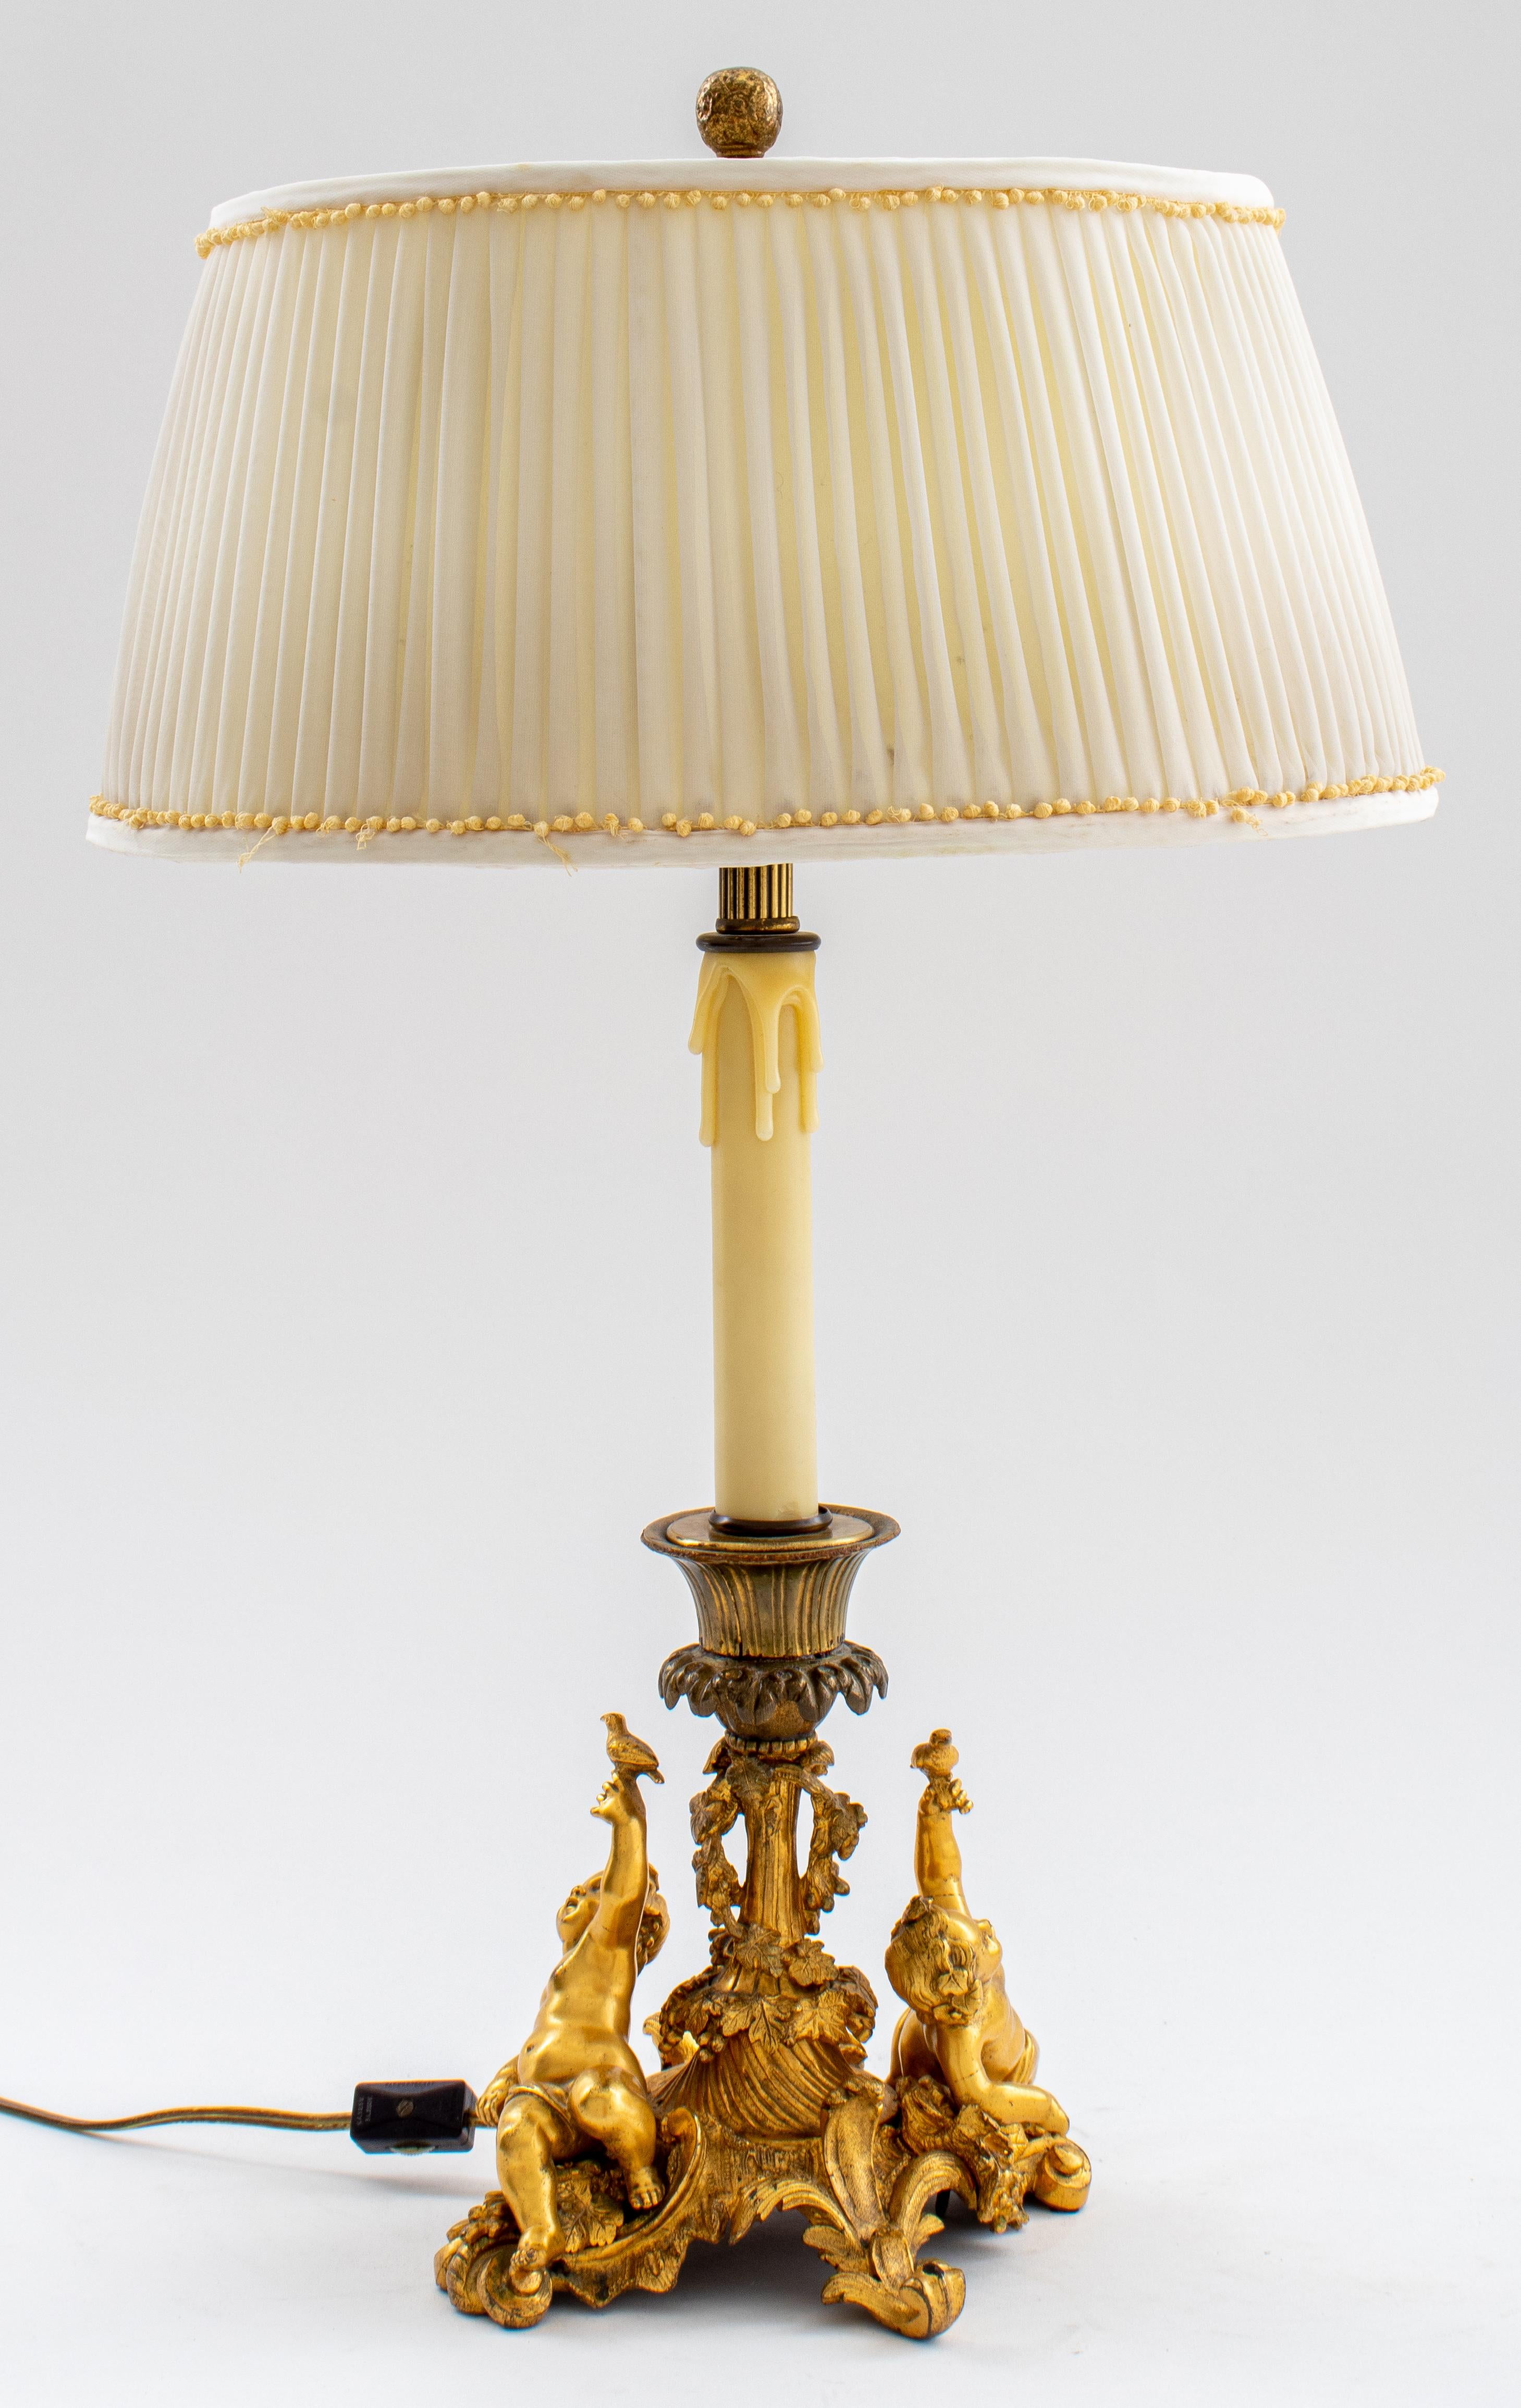 Louis XV Style Ormolu Candlestick Lamp, c. 1900, the ormolu base depicting two putti in the manner of Meissonier atop fruiting rocailles flanking a wreathed column supporting a single light. 22.5